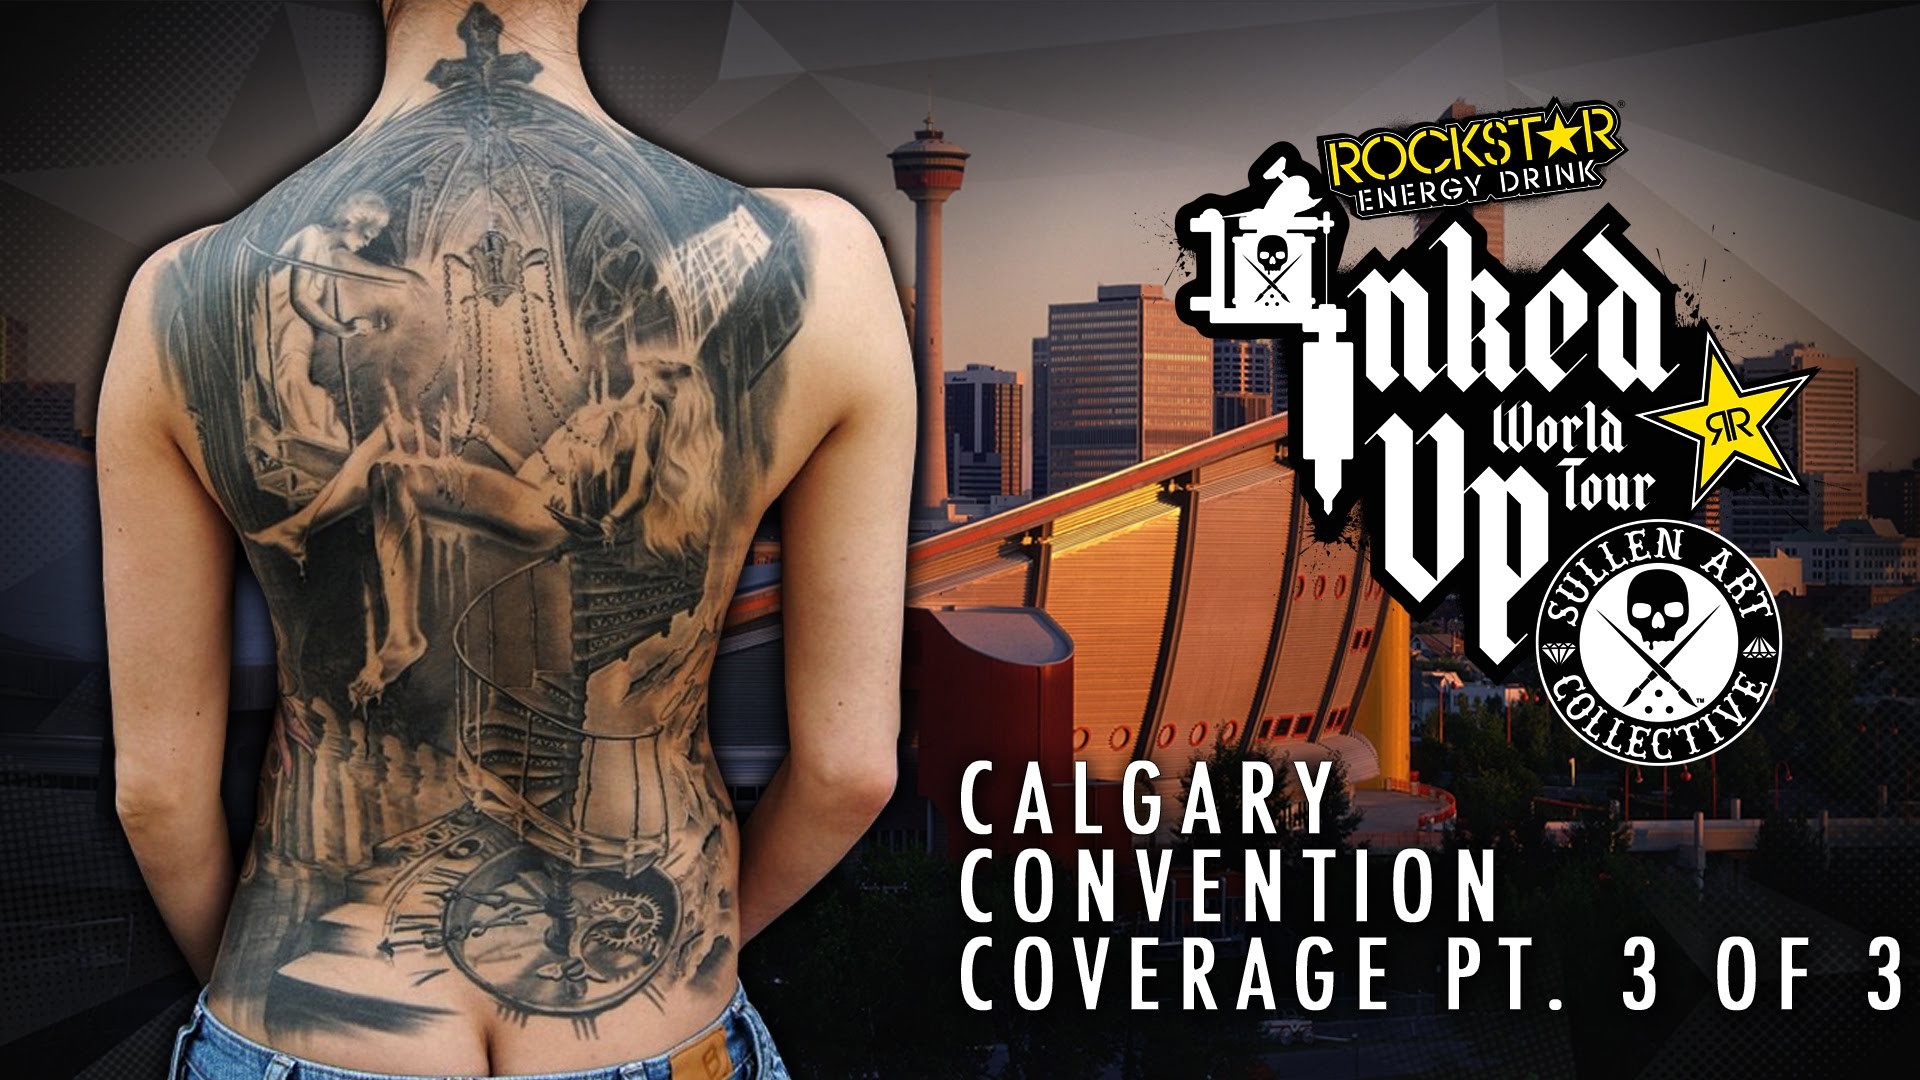 1920x1080 Rockstar Energy Drink Inked up Tour Calgary Convention Coverage pt. 3 of 3  - YouTube